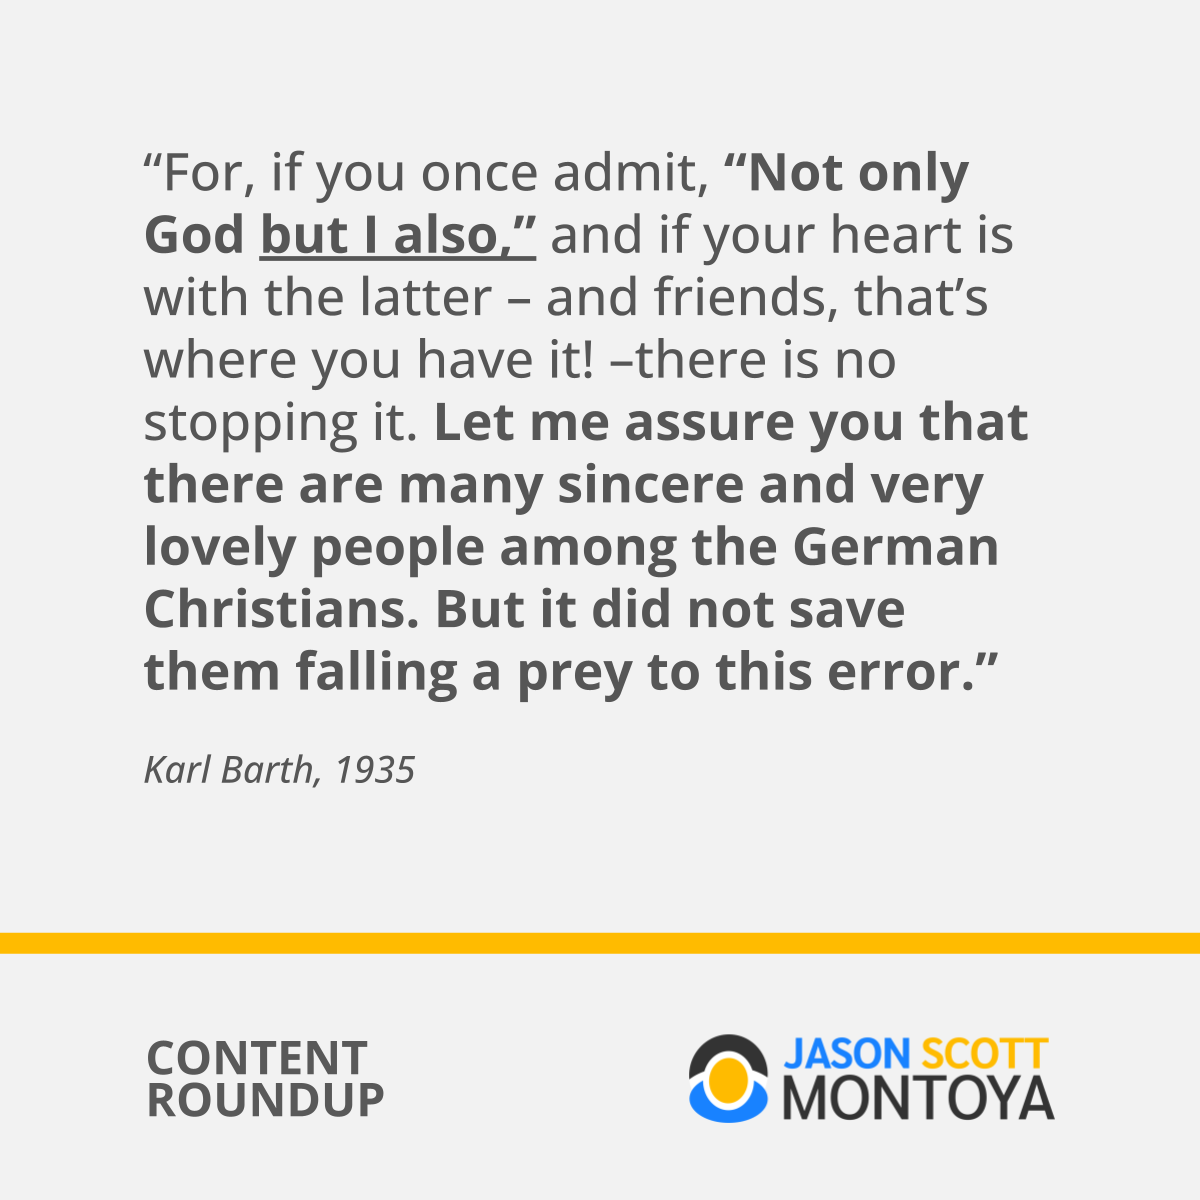 “For, if you once admit, “Not only God but I also,” and if your heart is with the latter – and friends, that’s where you have it! –there is no stopping it. Let me assure you that there are many sincere and very lovely people among the German Christians. But it did not save them falling a prey to this error.”  Karl Barth, 1935